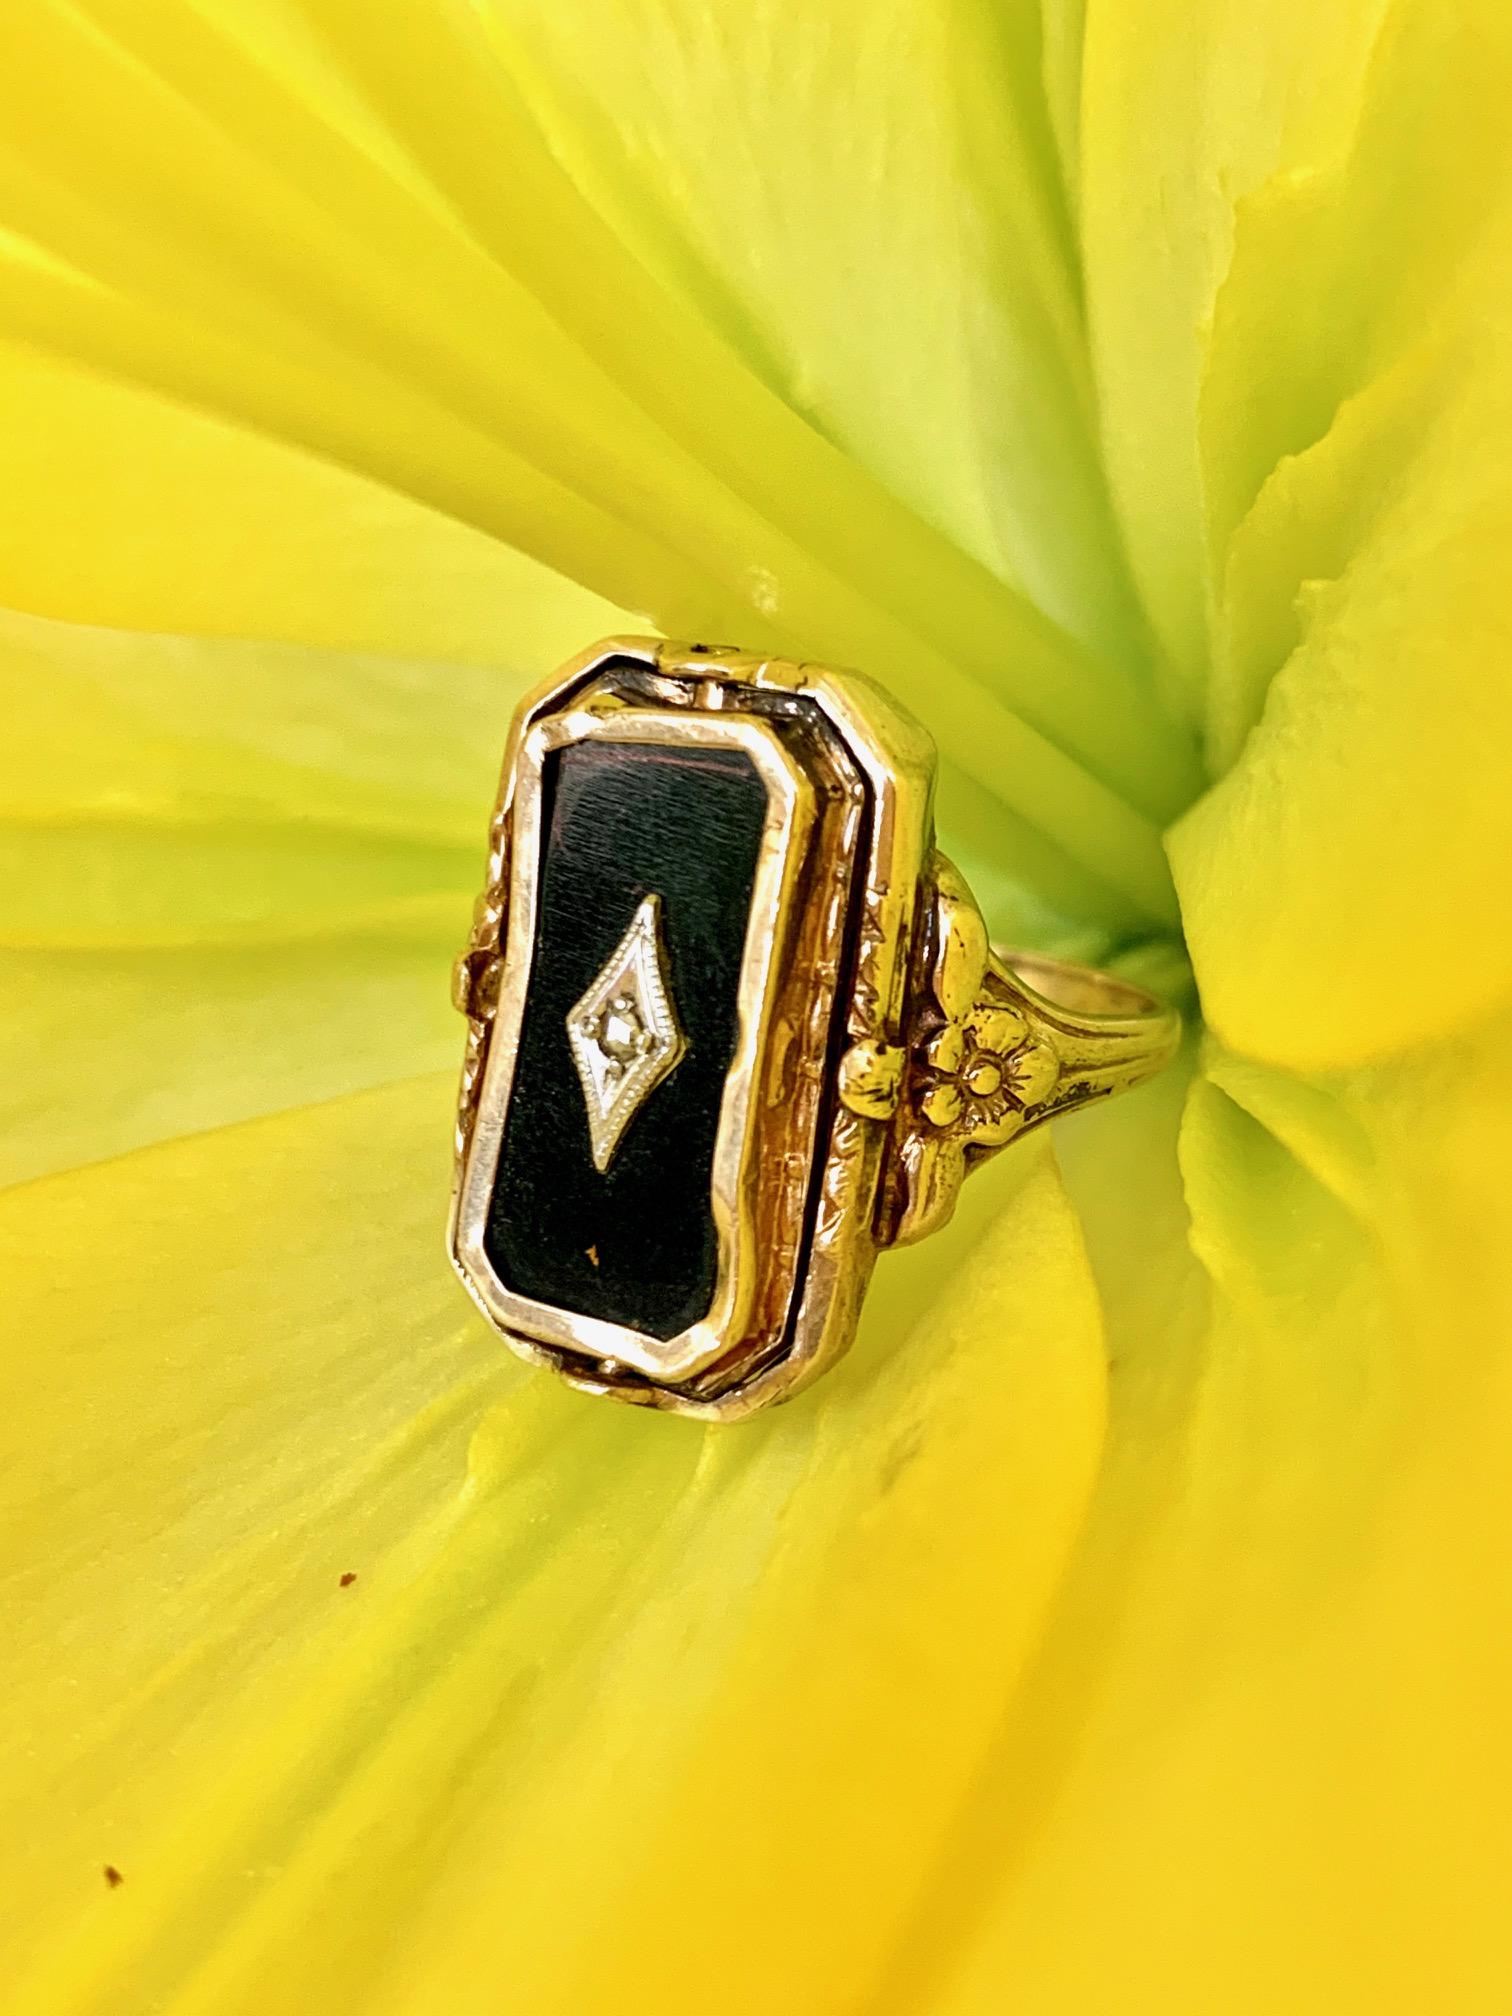 This Victorian ring is reversible, featuring a stone Cameo on one side and black Onyx and Diamond mourning jewelry on the other side of the ring.  The ring setting is 10k yellow gold.
Cameo measures: 
Weight: 4.4 grams
Size: 5 - this ring is